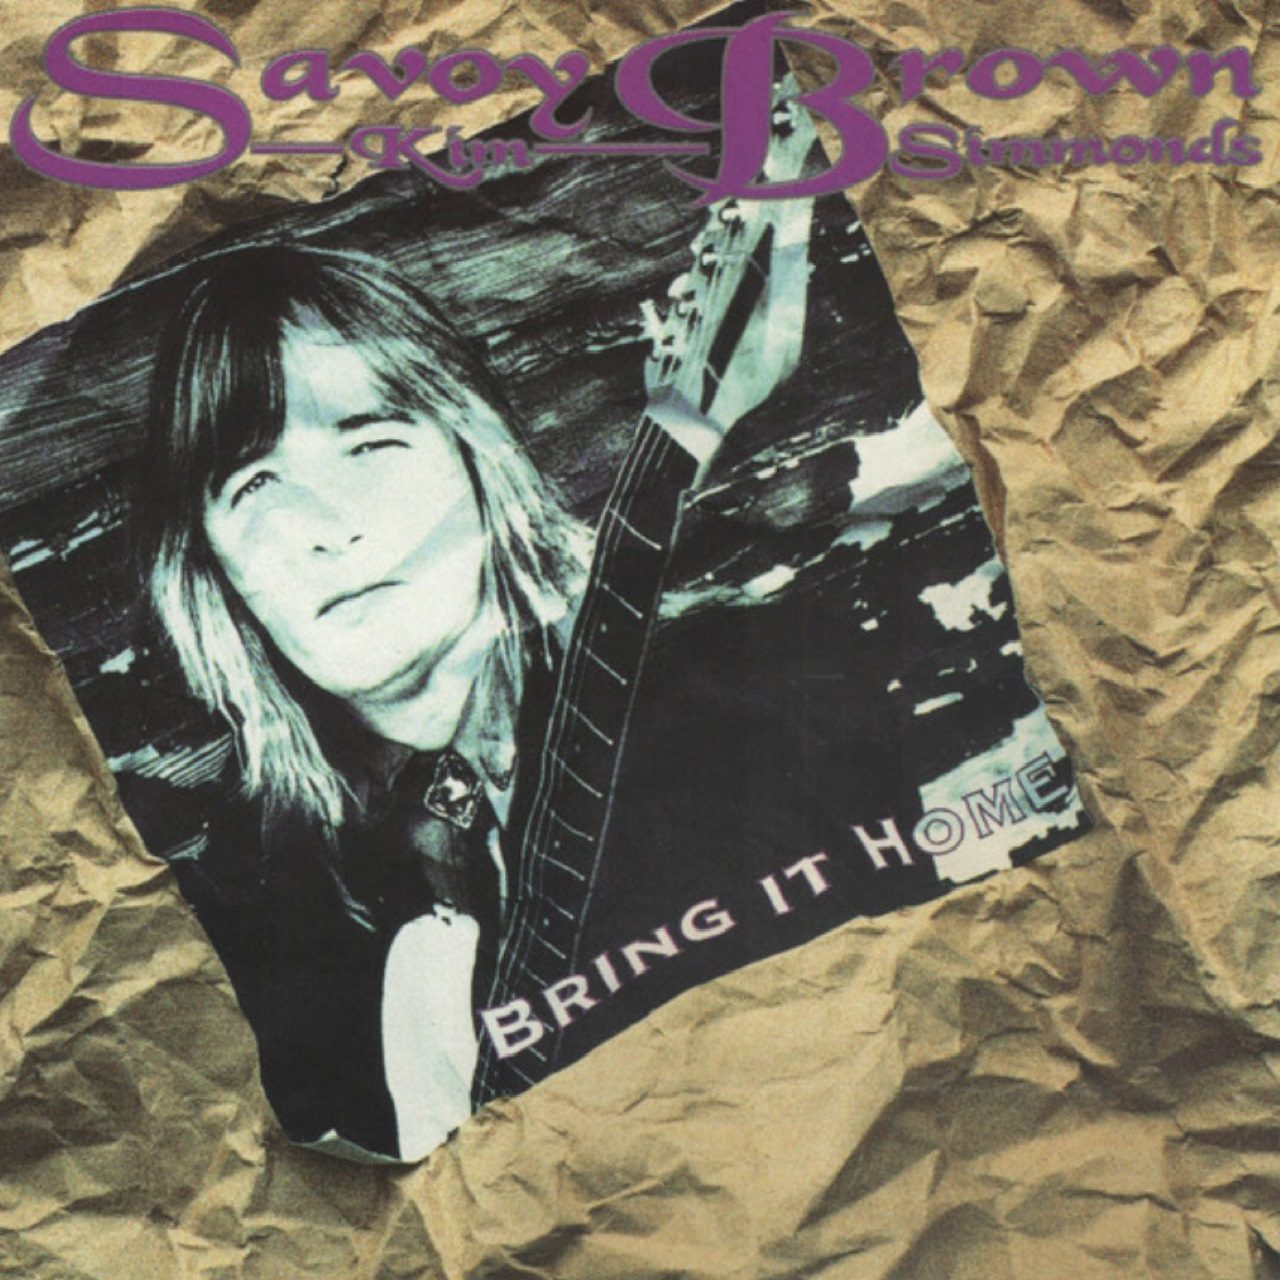 Savoy Brown – Bring It On Home cover album